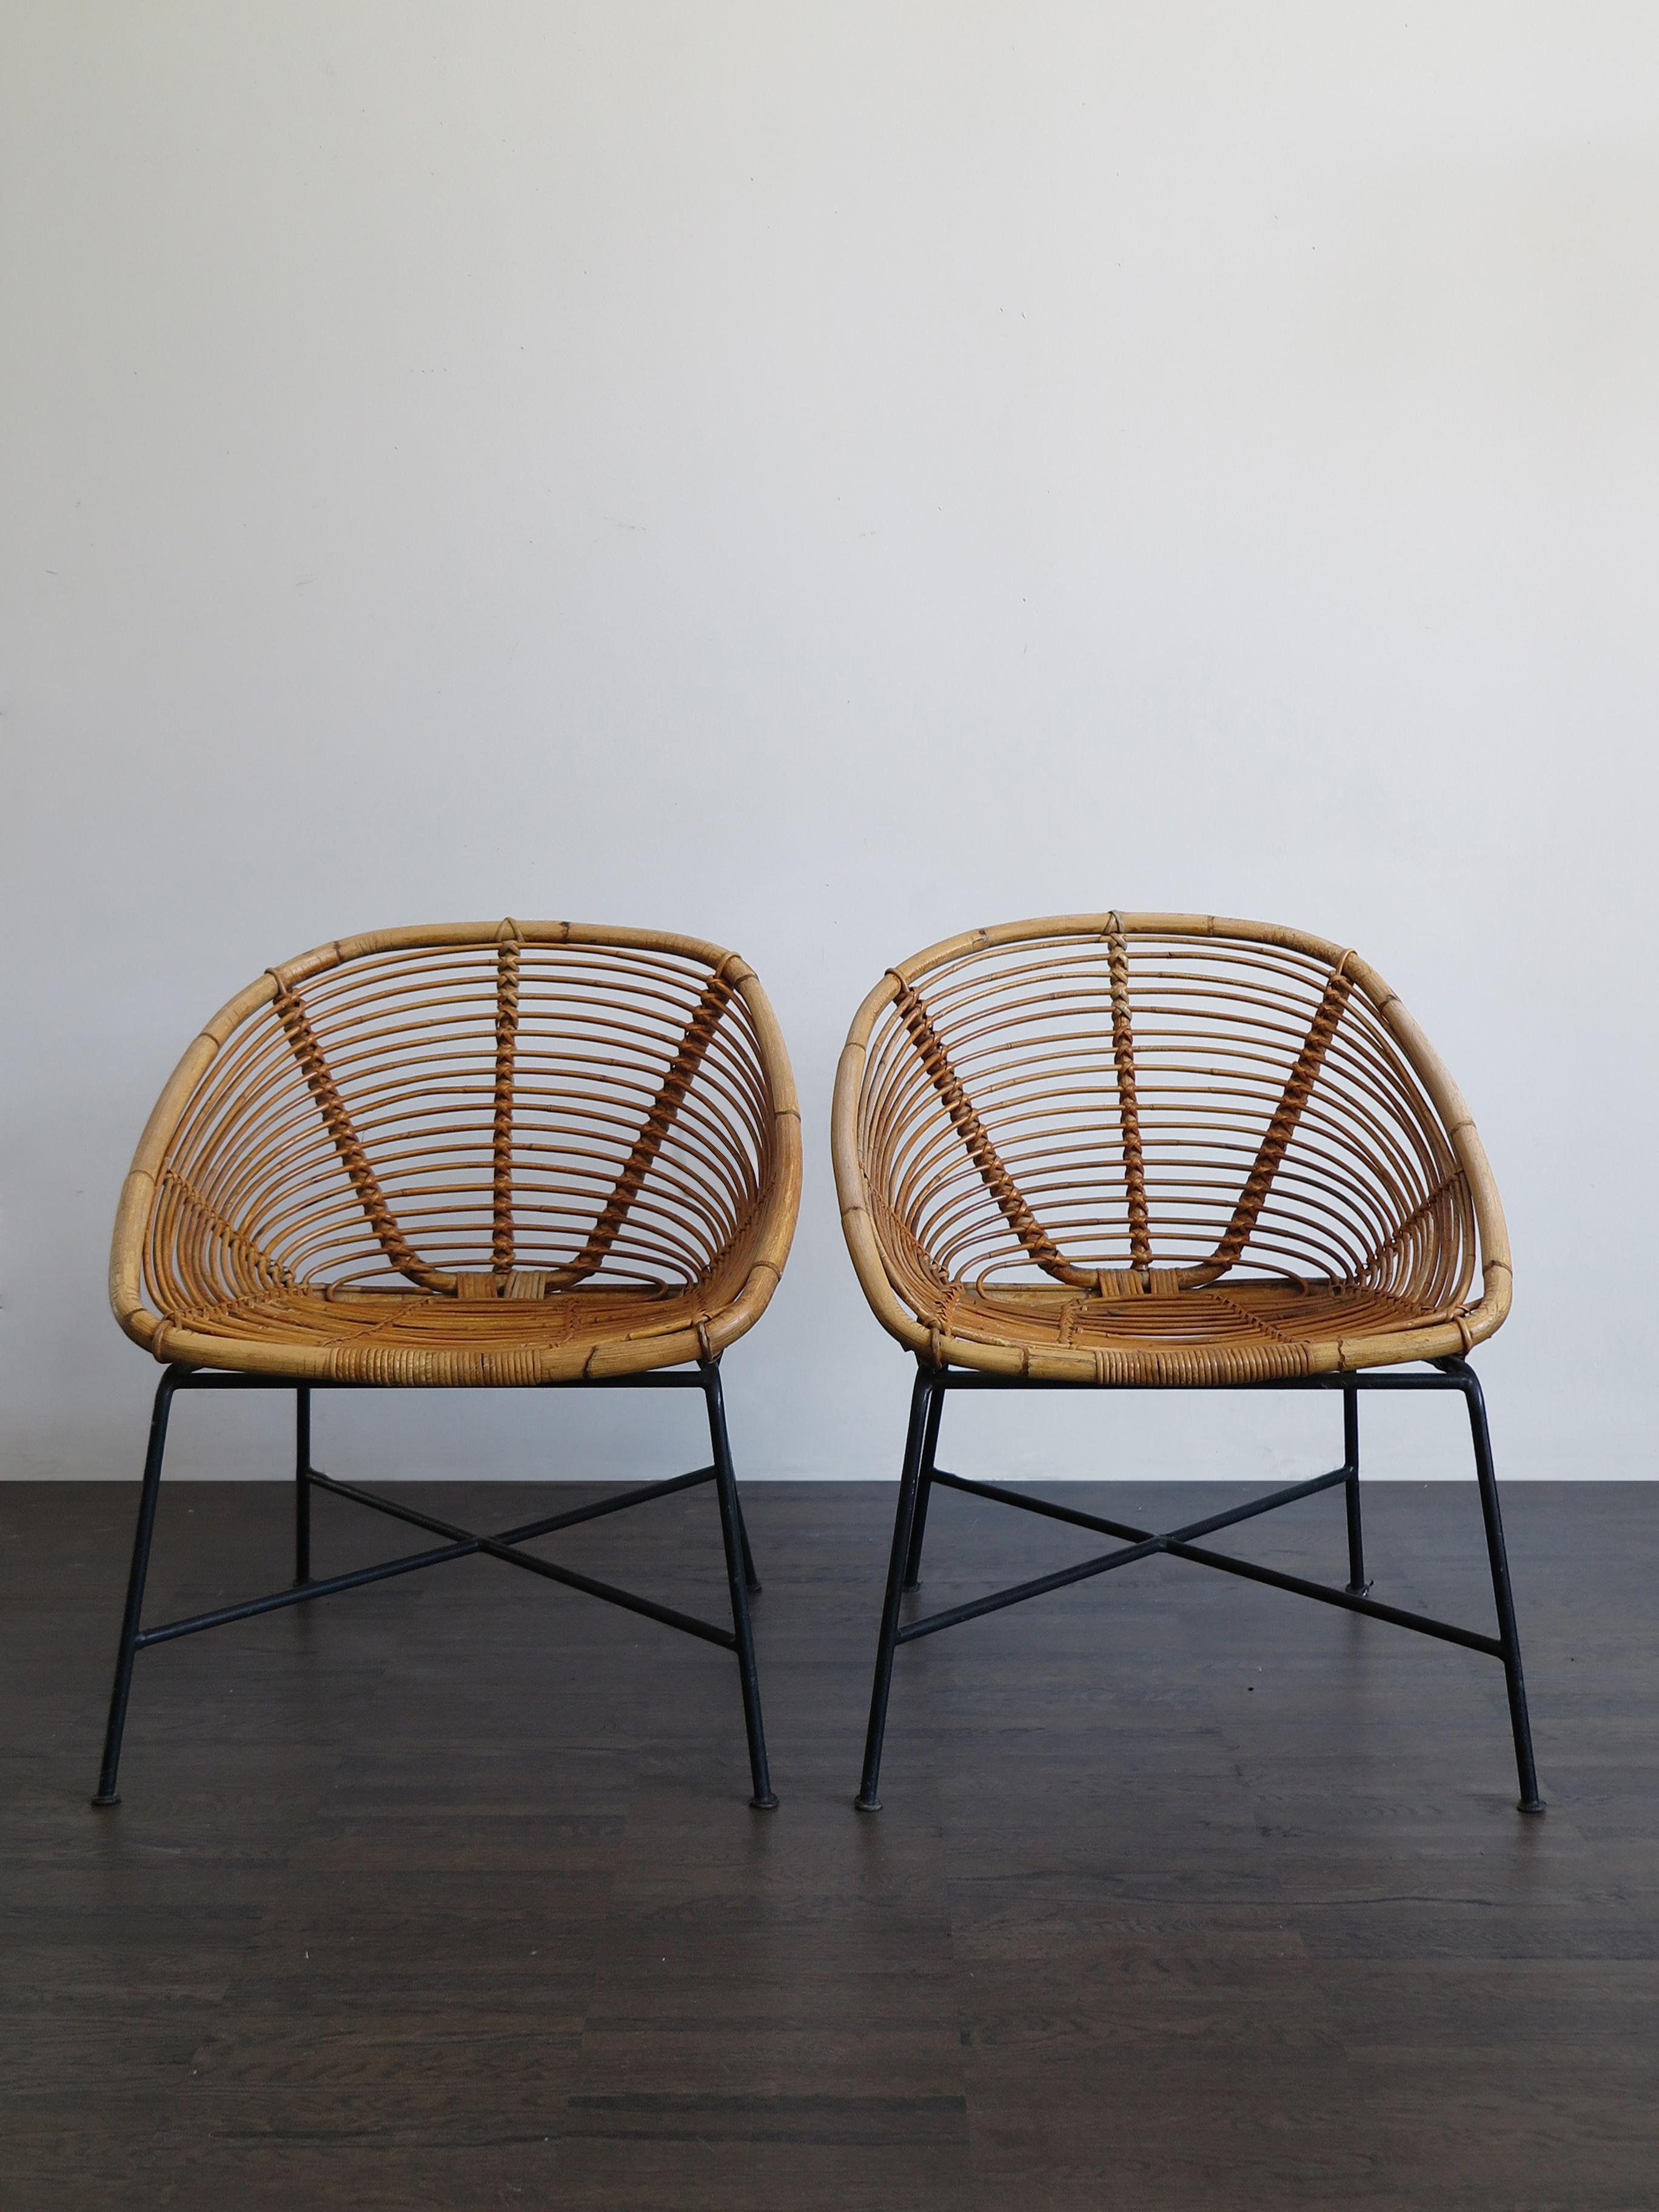 Couple of Italian Mid-Century Modern design chairs armchair in bamboo, rush, cane and structure with painted iron rod, 1960s.

Please note that the items are original of the period and this shows normal signs of age and use.